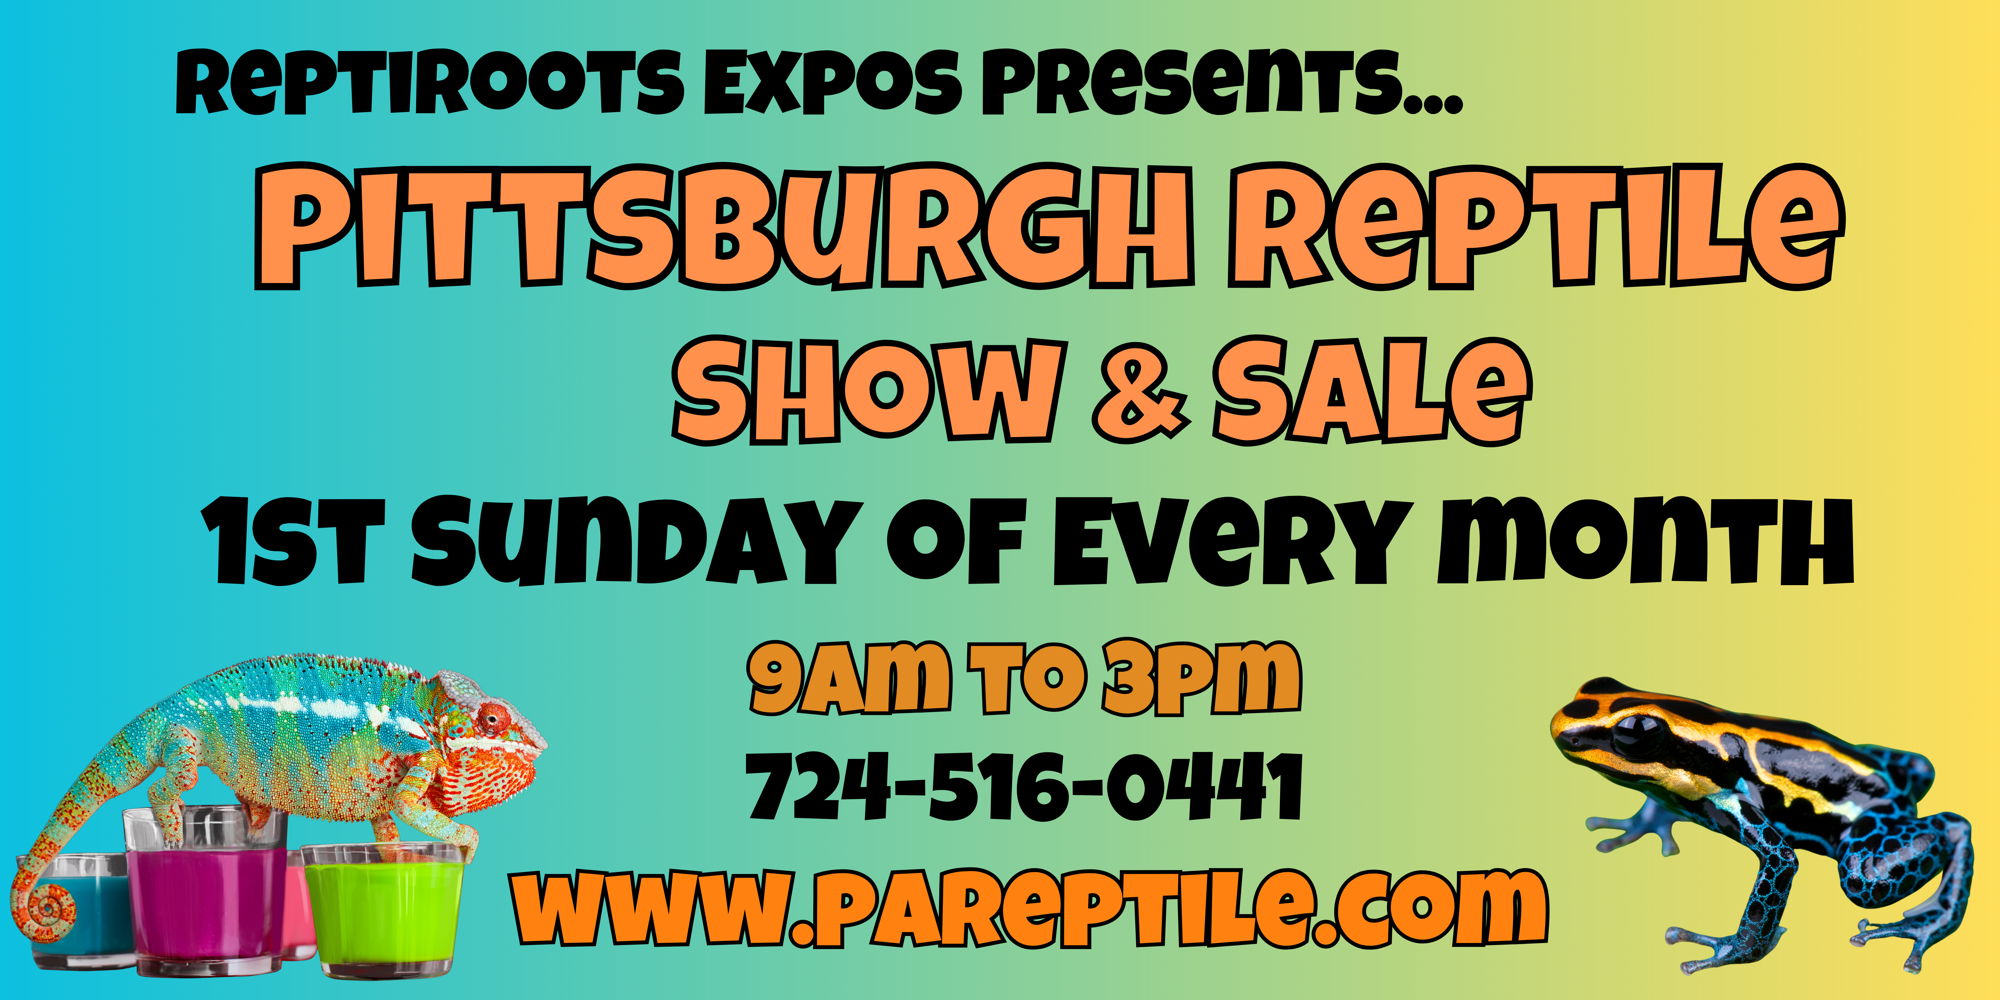 Pittsburgh Reptile Show & Sale May 5th promotional image